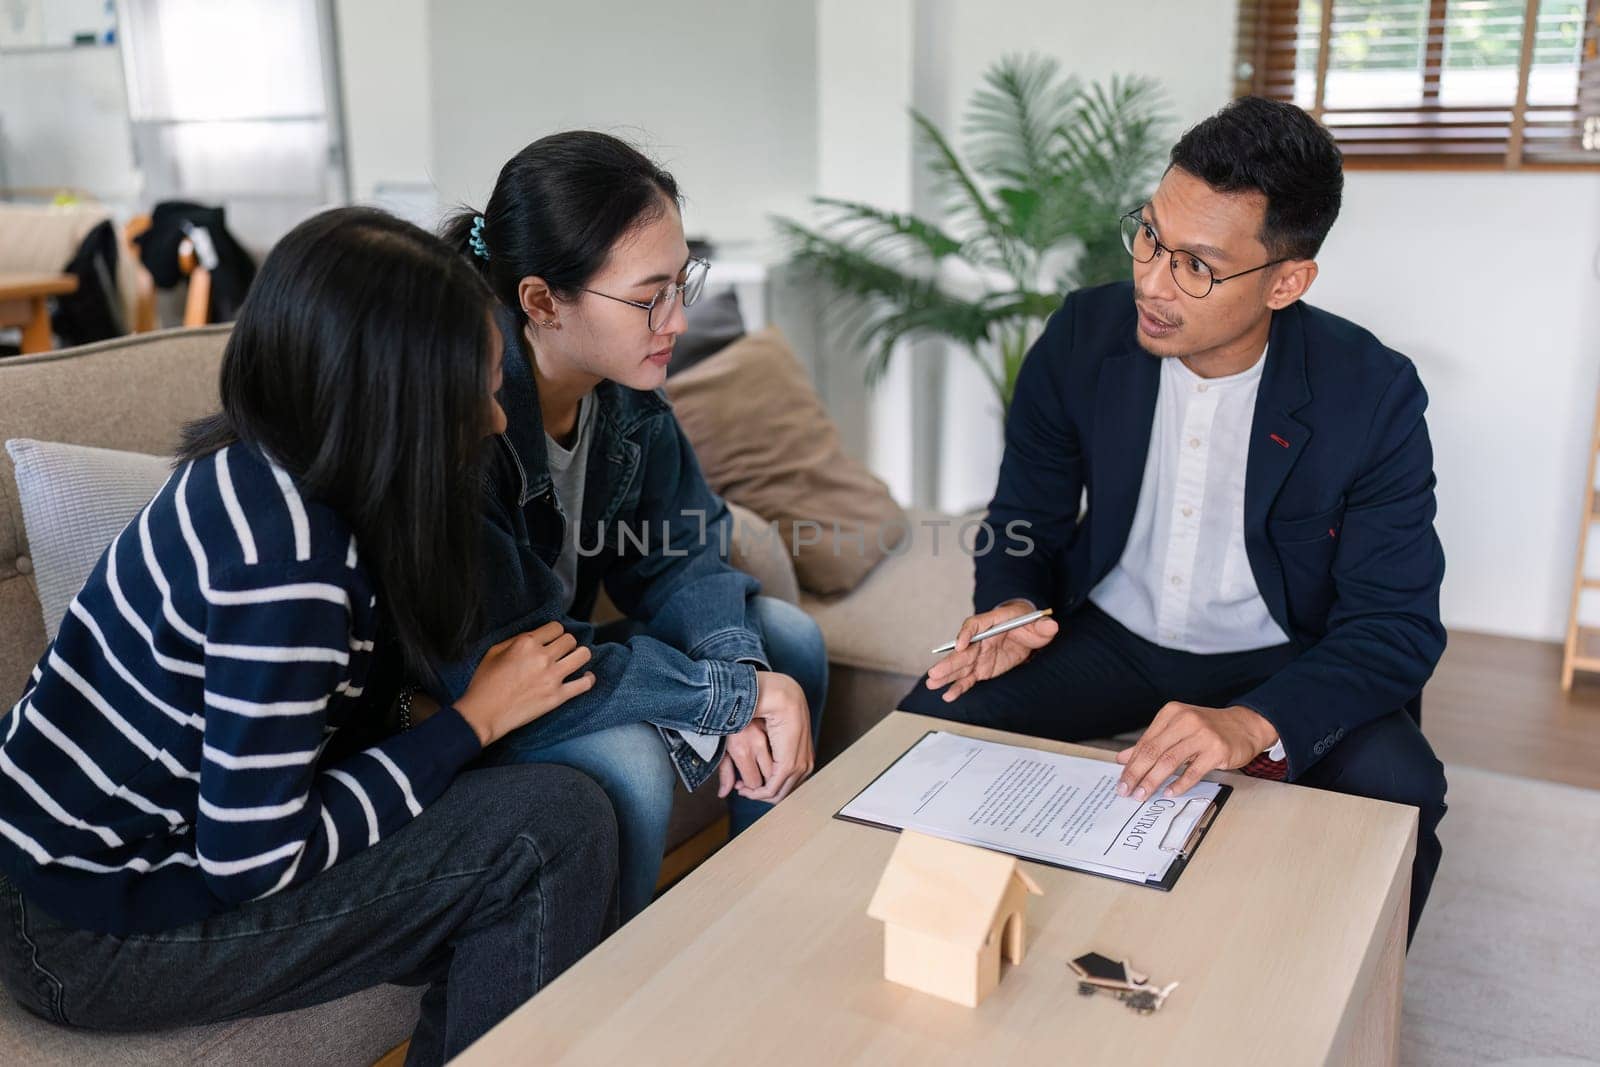 young lesbian married couple discussing agreement with real estate agent or broker. Professional financial advisor or saleswoman explaining contract detail by itchaznong